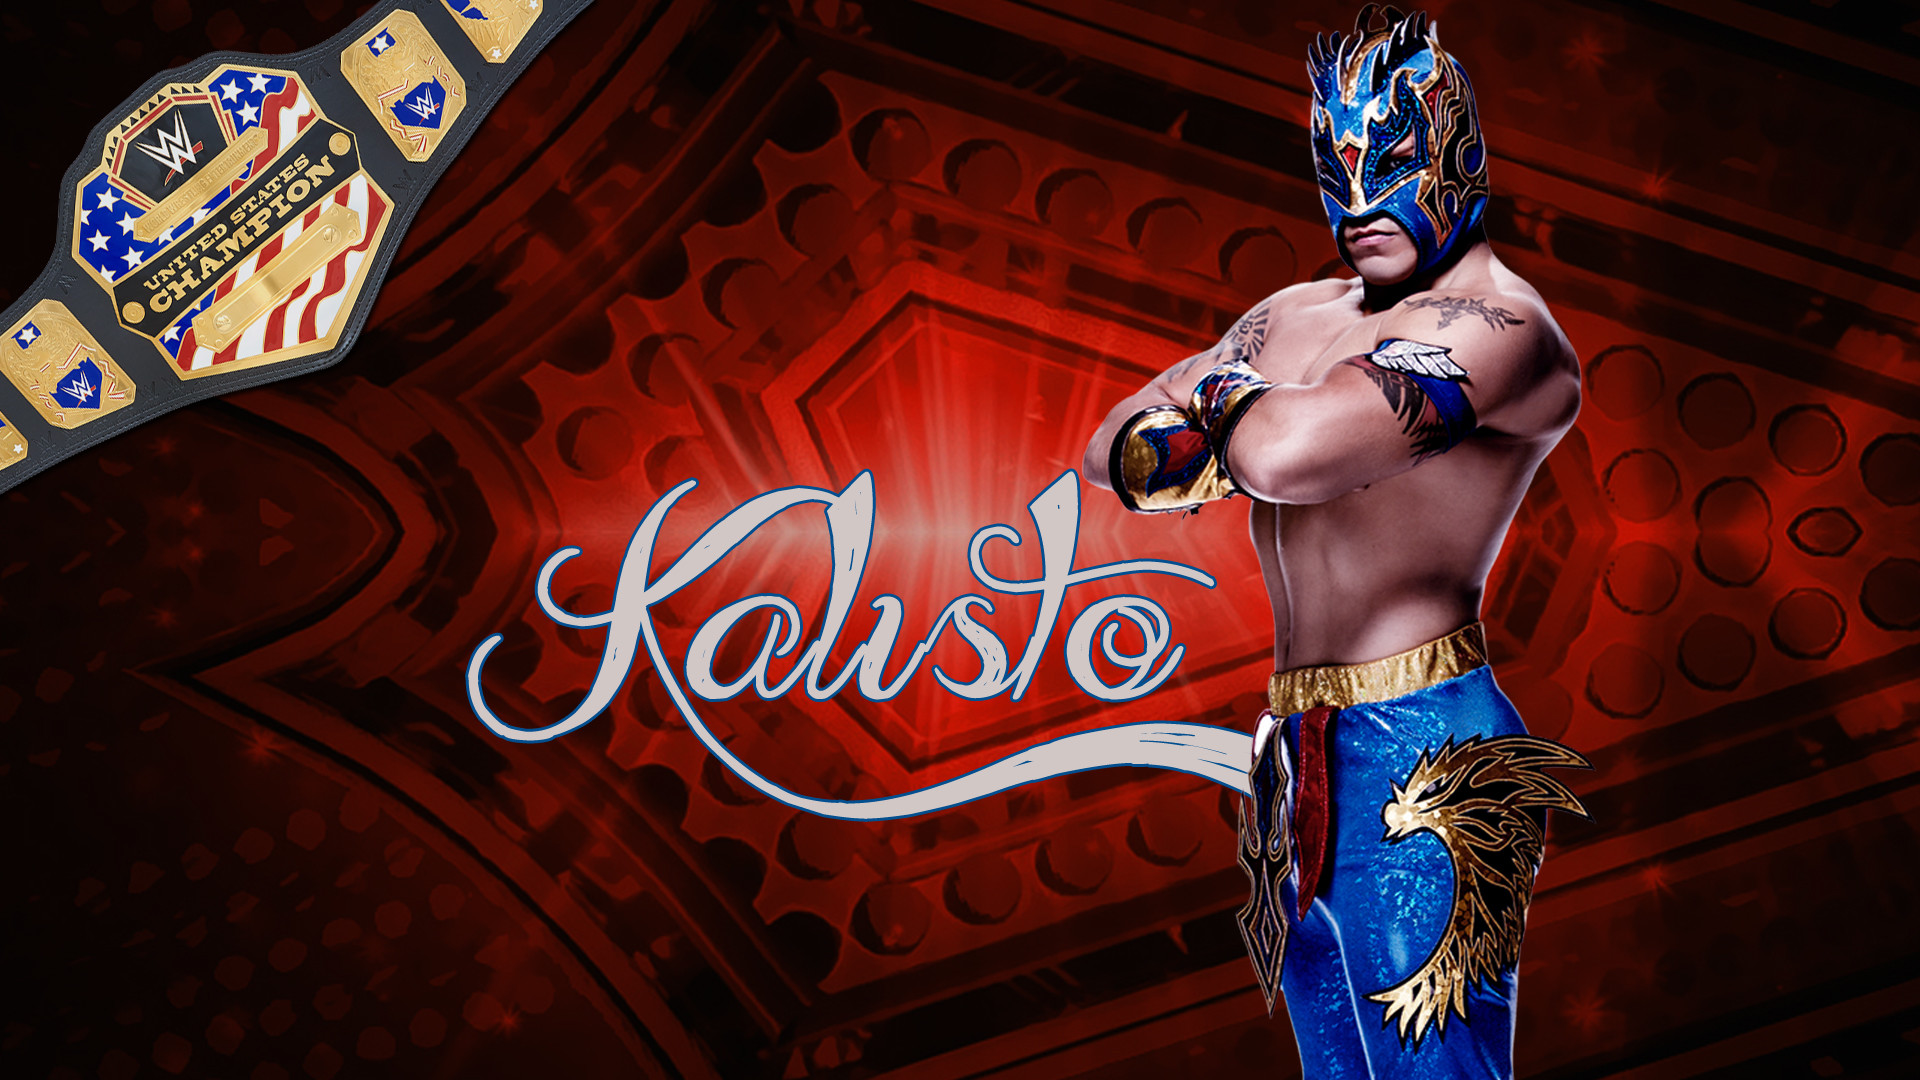 WWE Superstar kalisto HD Wallpapers Pictures